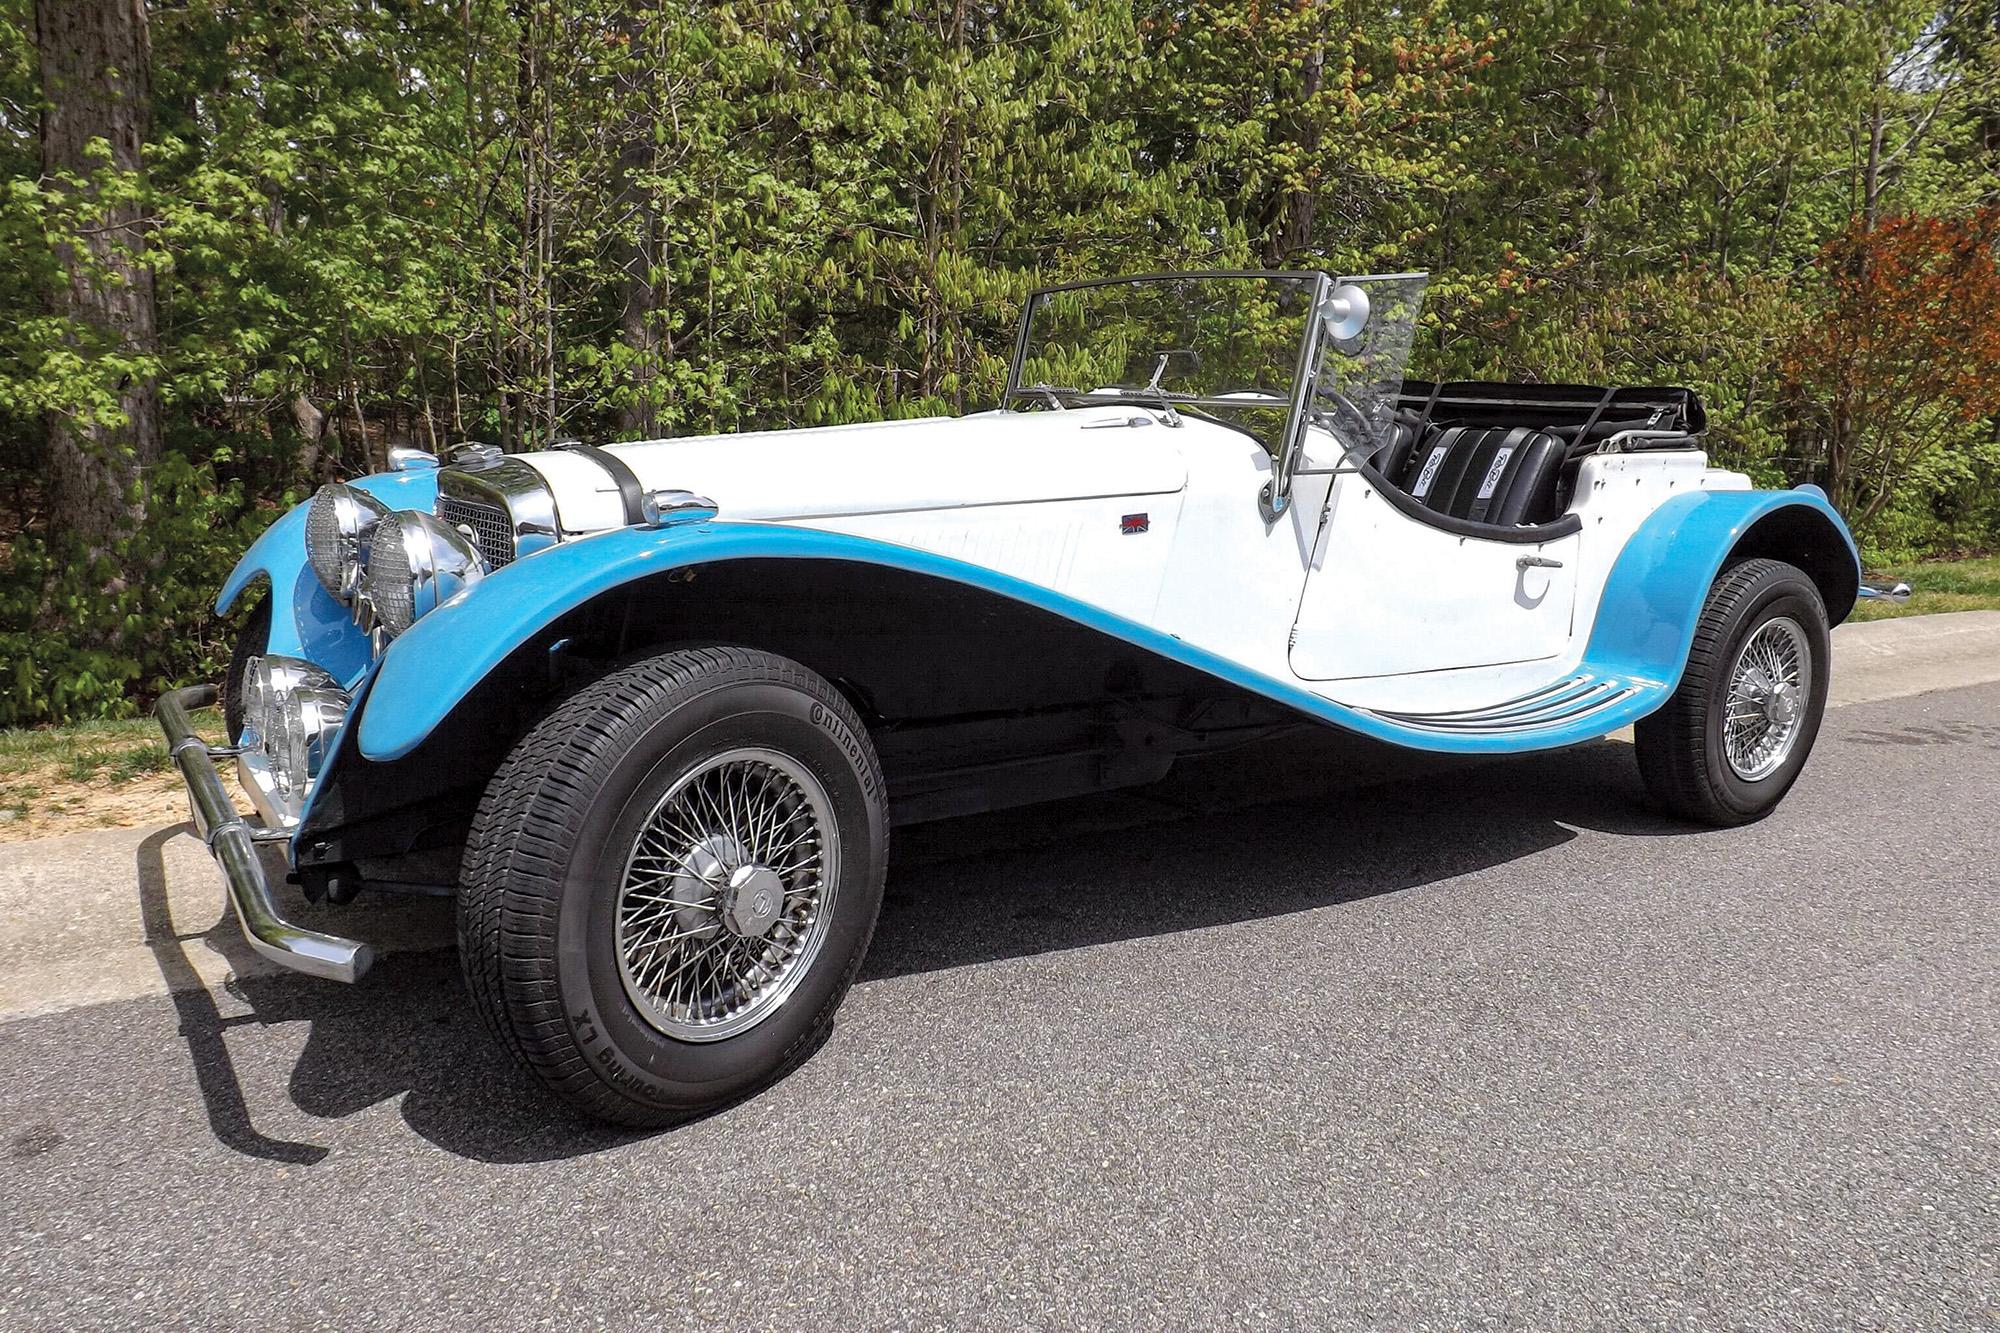 This Italian-built 1930s Jaguar Replica's Value Is On The Move